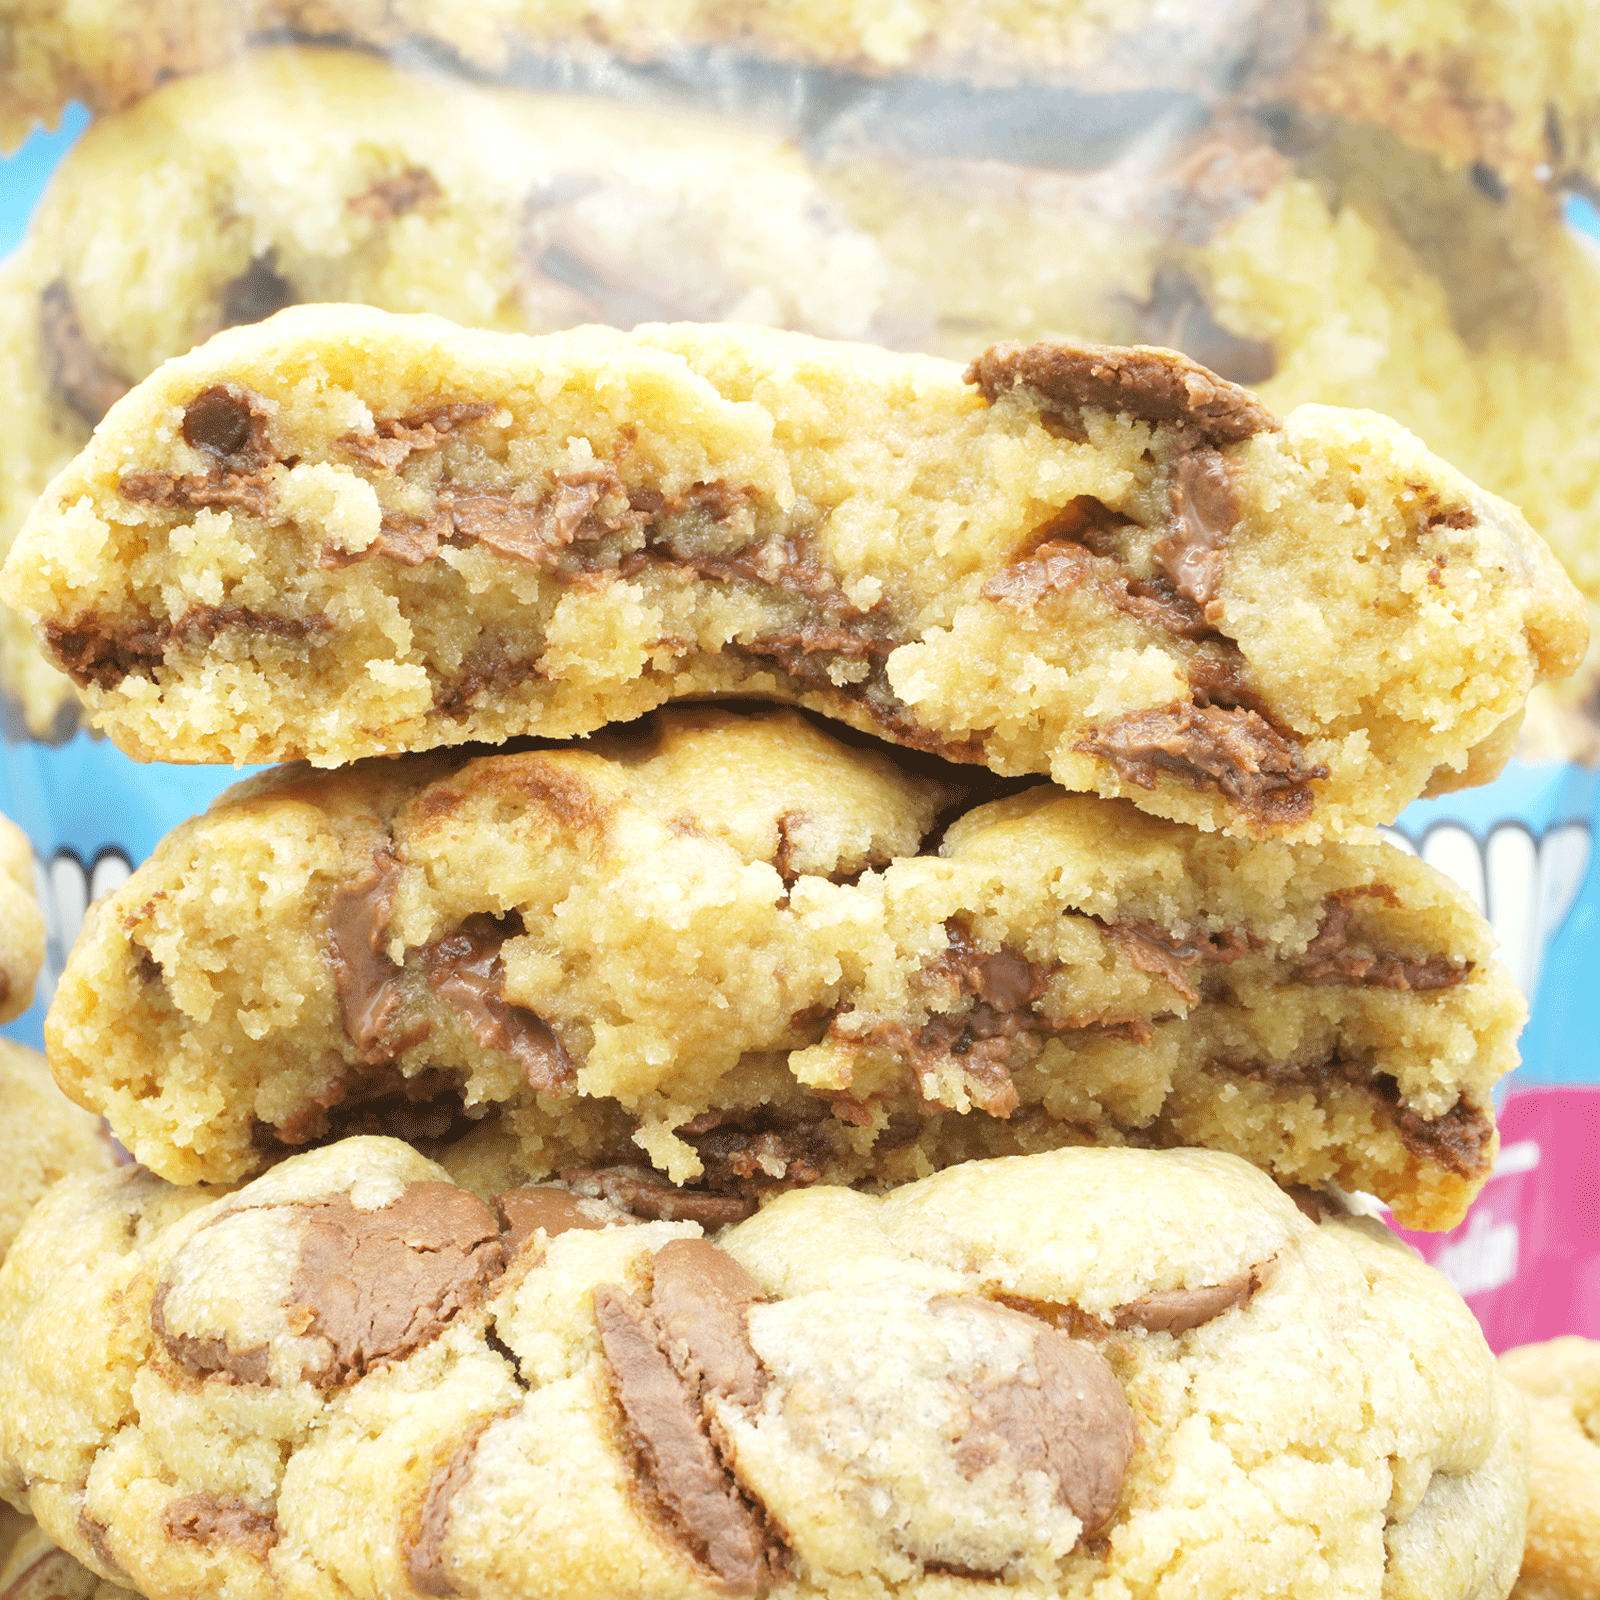 Chocolate Chip Bake At Home Cookies